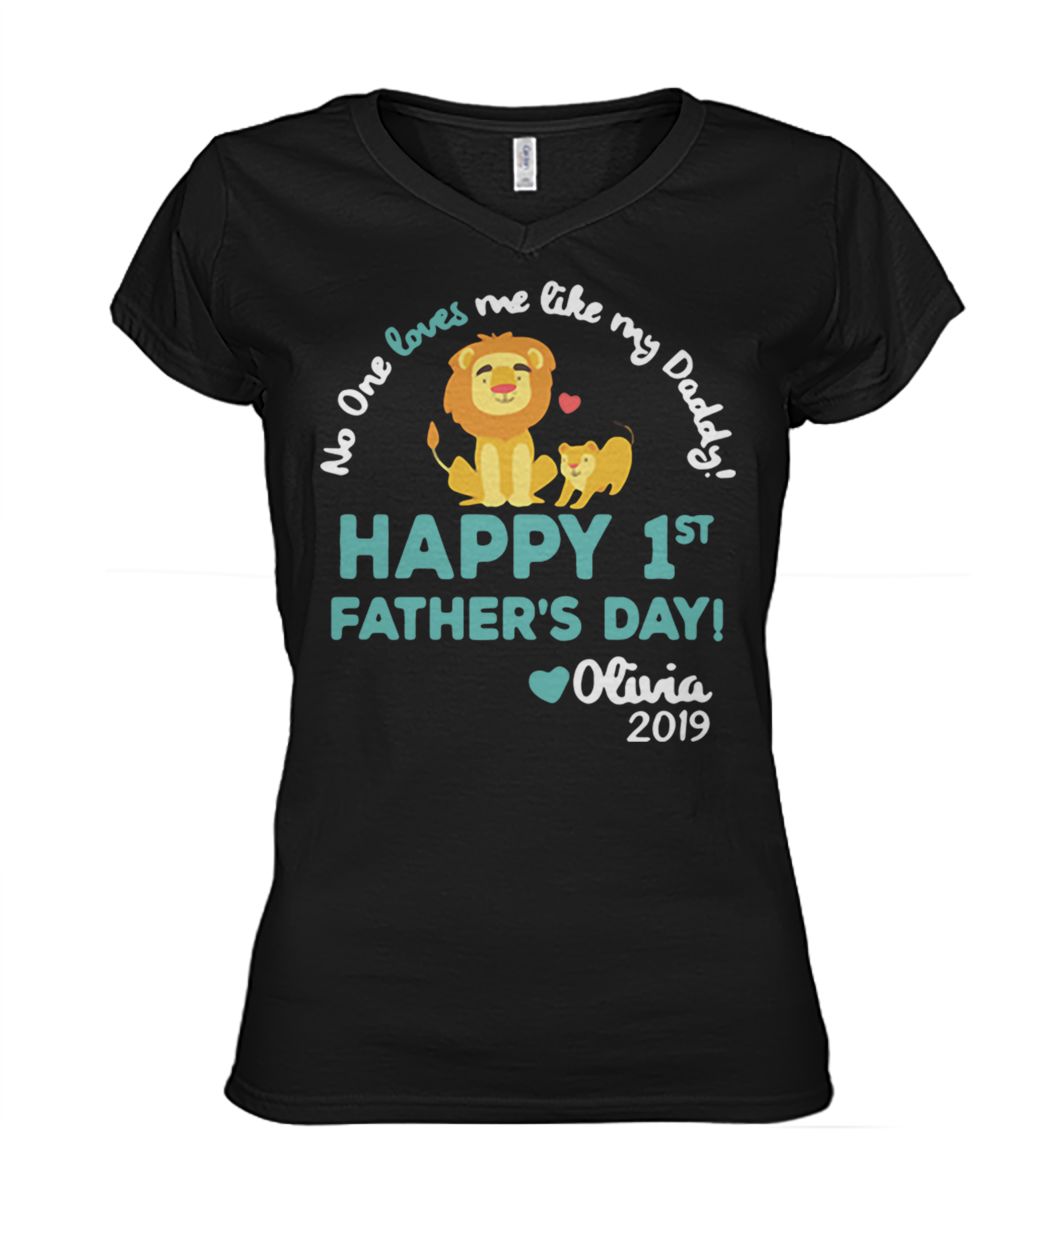 The lion king no one loves me like my daddy happy 1st father's day olivia 2019 women's v-neck